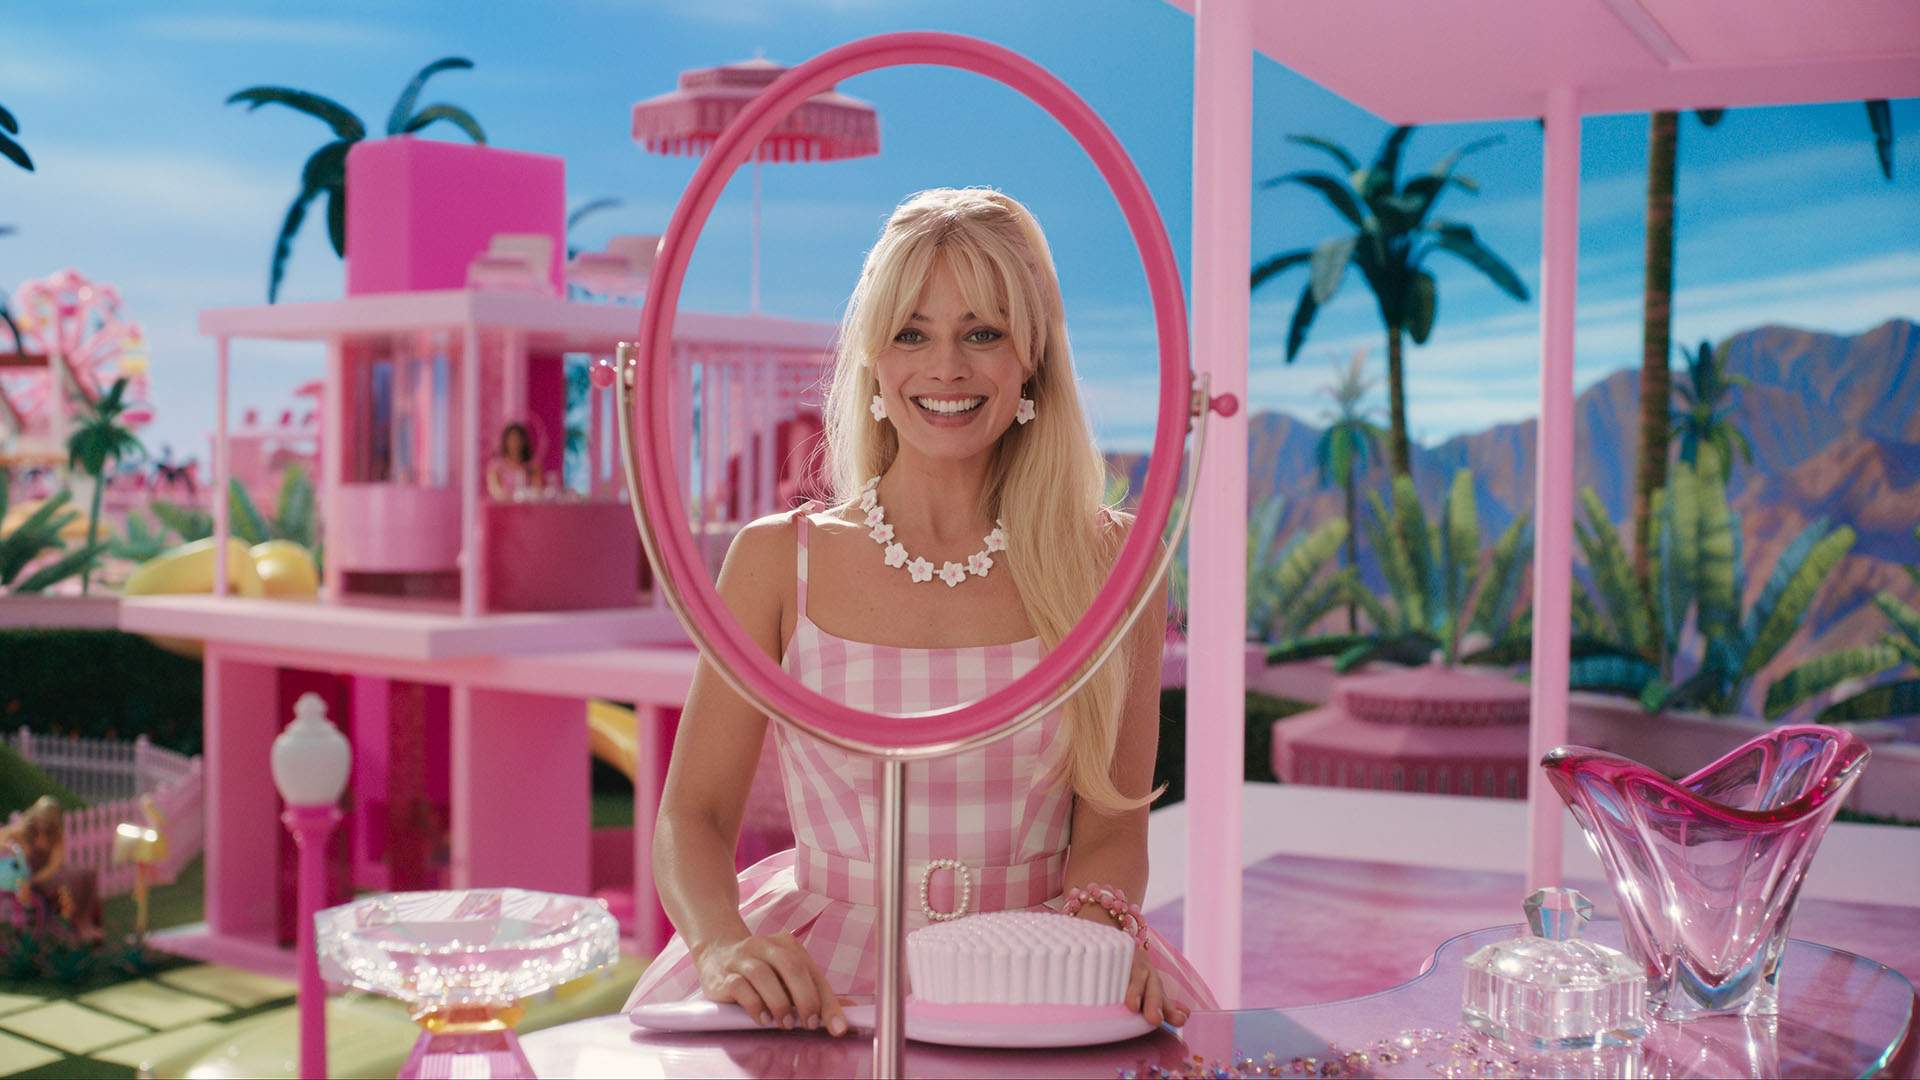 It's Official: 'Barbie' Is Now 2023's Highest-Grossing Film and in the Top 15 of All Time